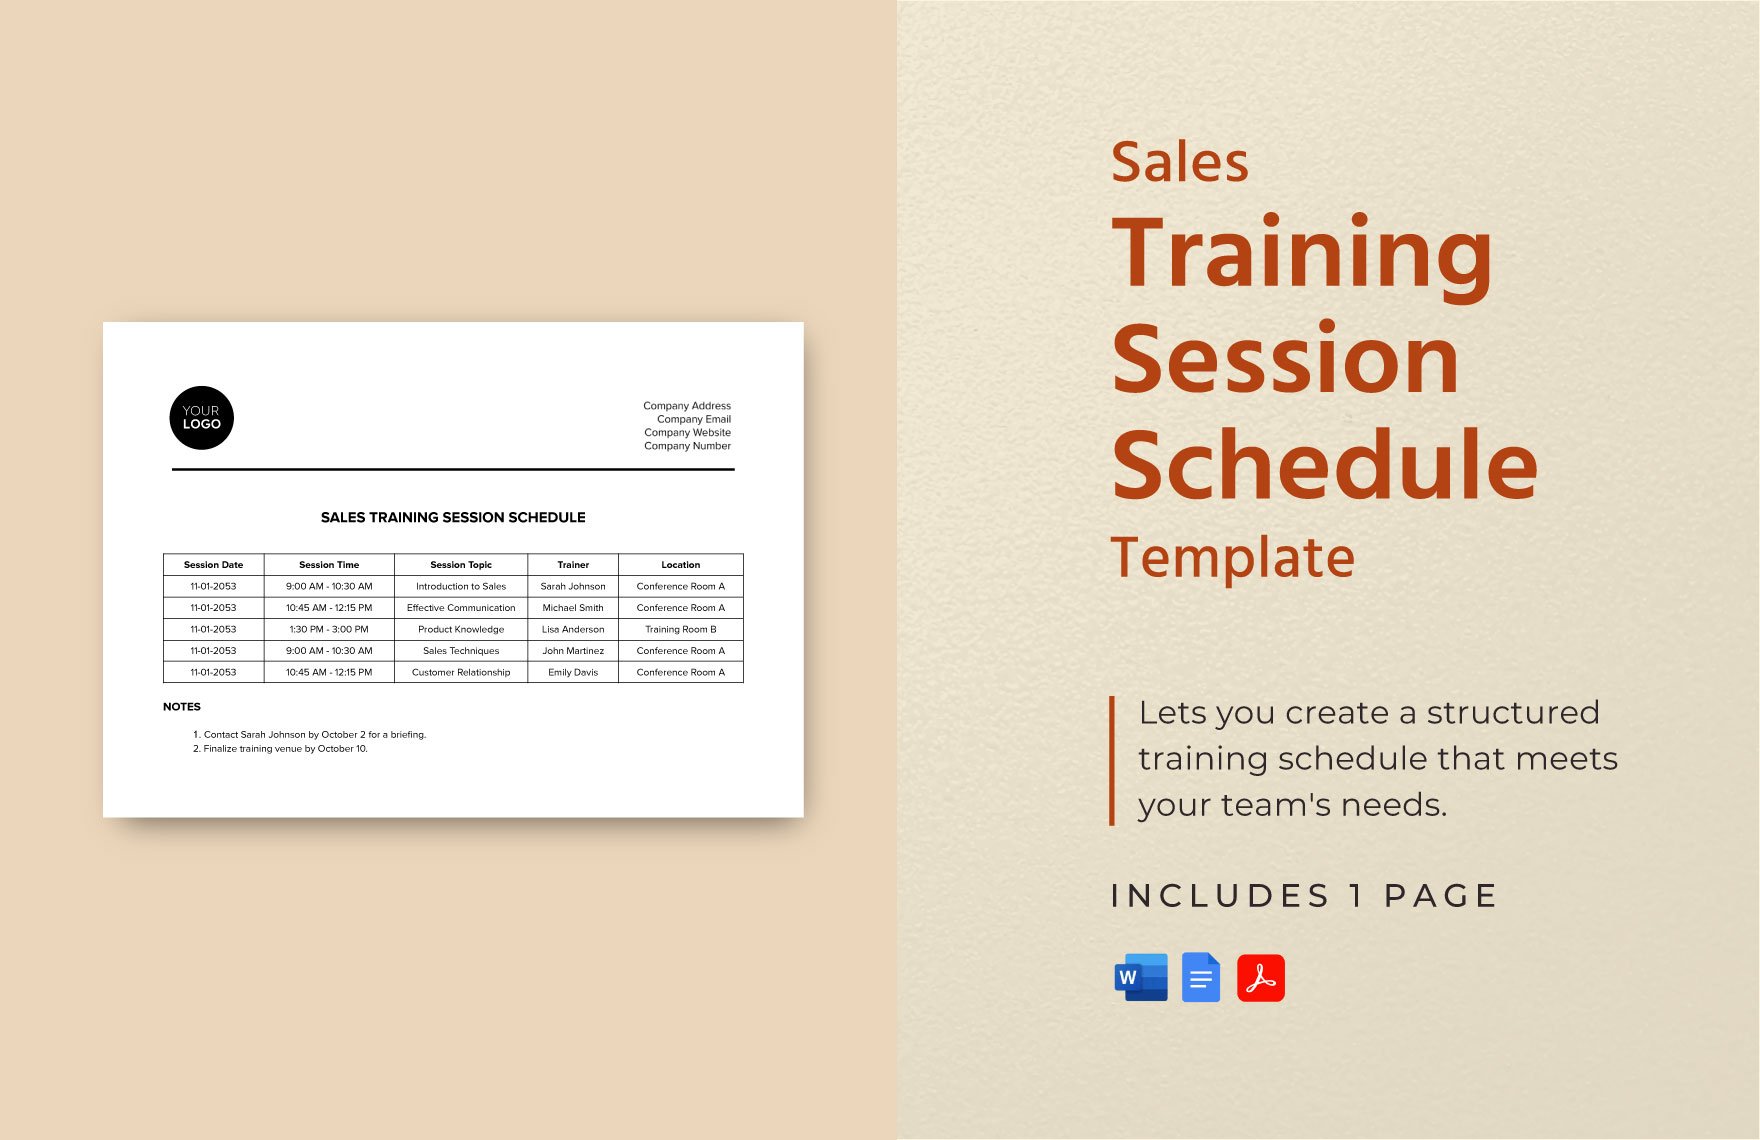 Sales Training Session Schedule Template